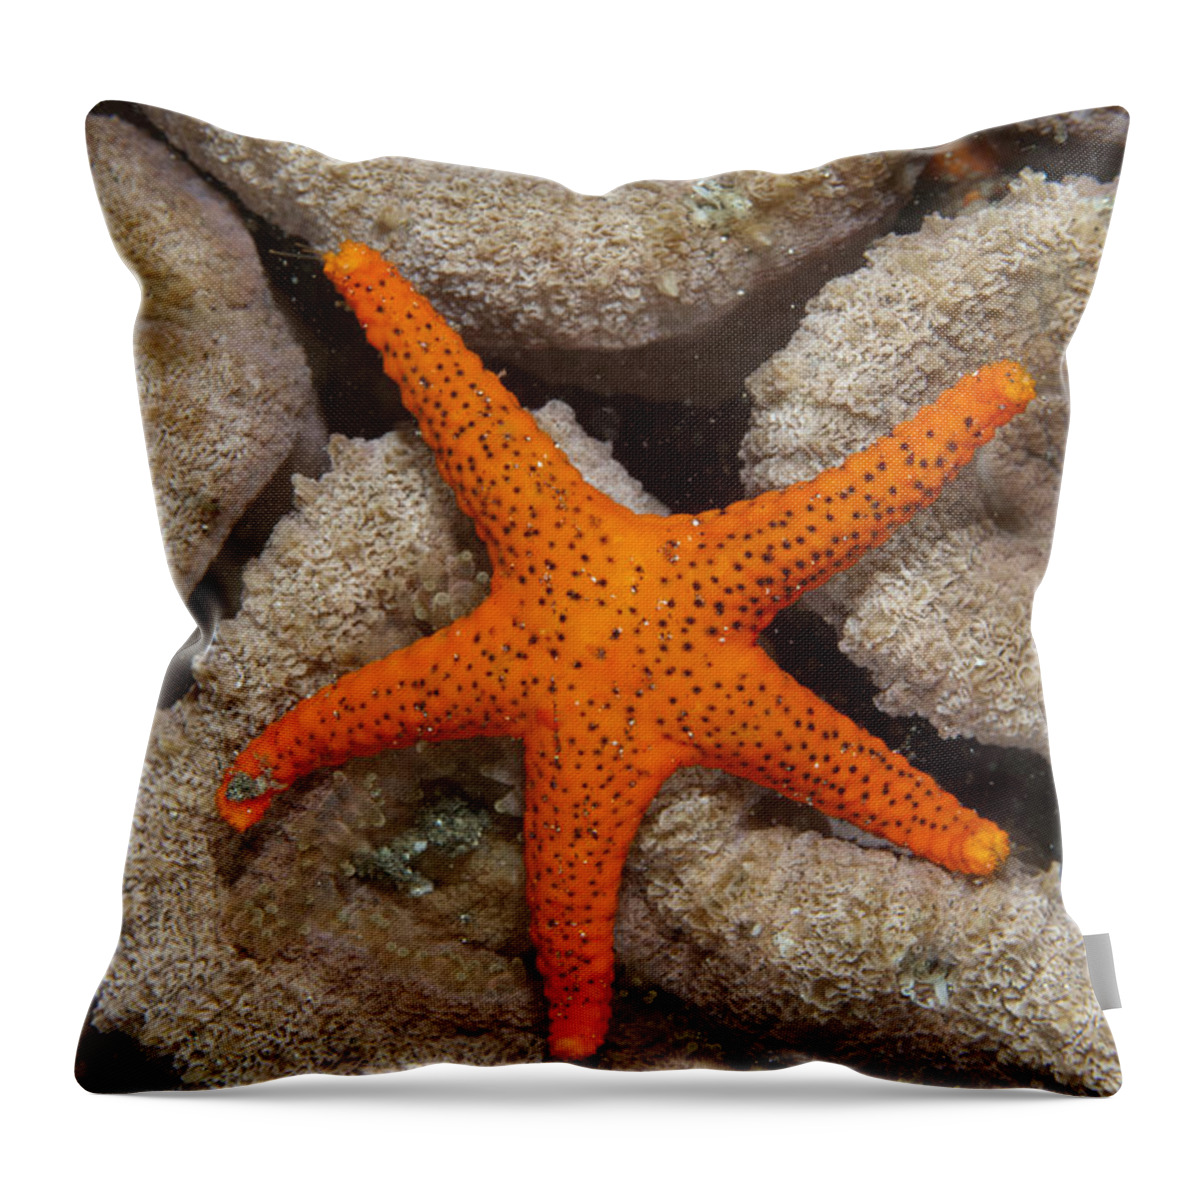 Flpa Throw Pillow featuring the photograph Thousand-pores Starfish On Coral by Colin Marshall